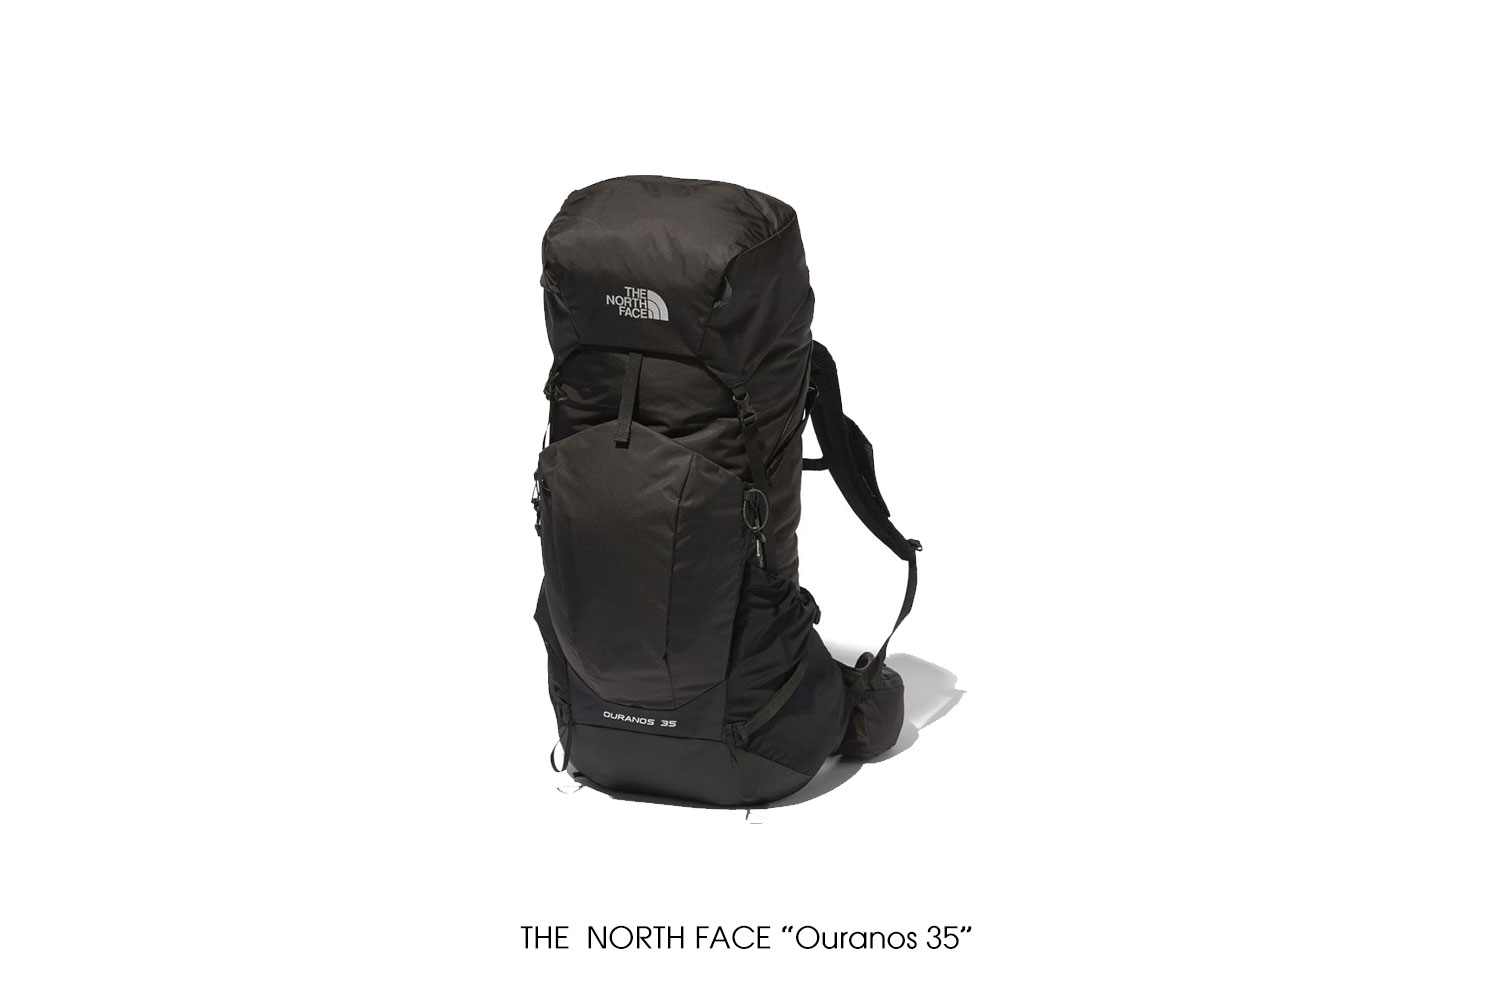 THE NORTH FACE “Ouranos 35” | PORTAL(ポータル)